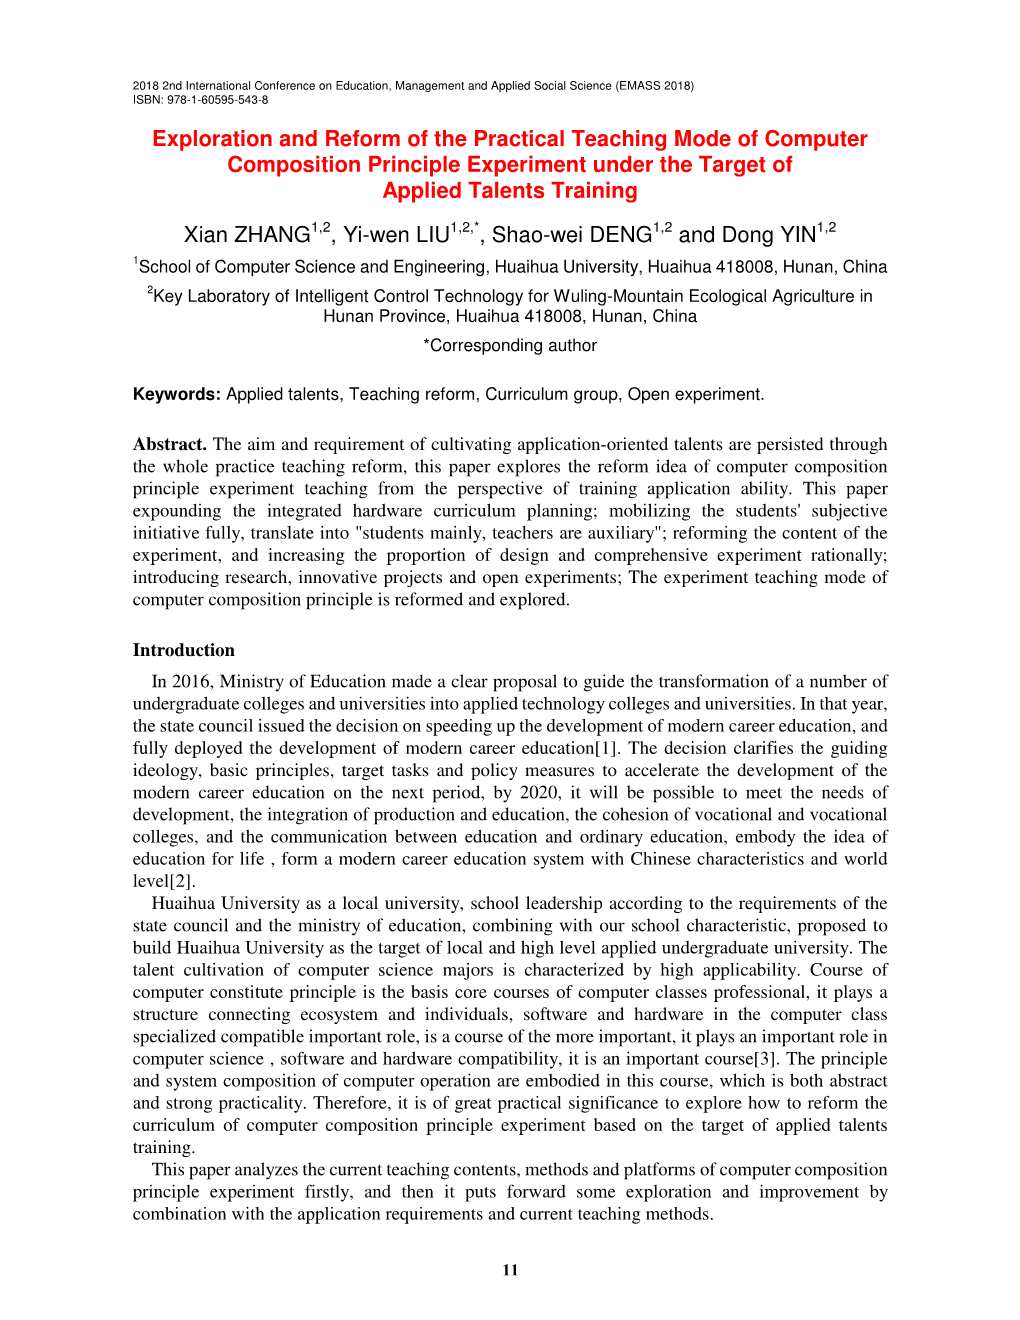 Exploration and Reform of the Practical Teaching Mode of Computer Composition Principle Experiment Under the Target of Applied Talents Training